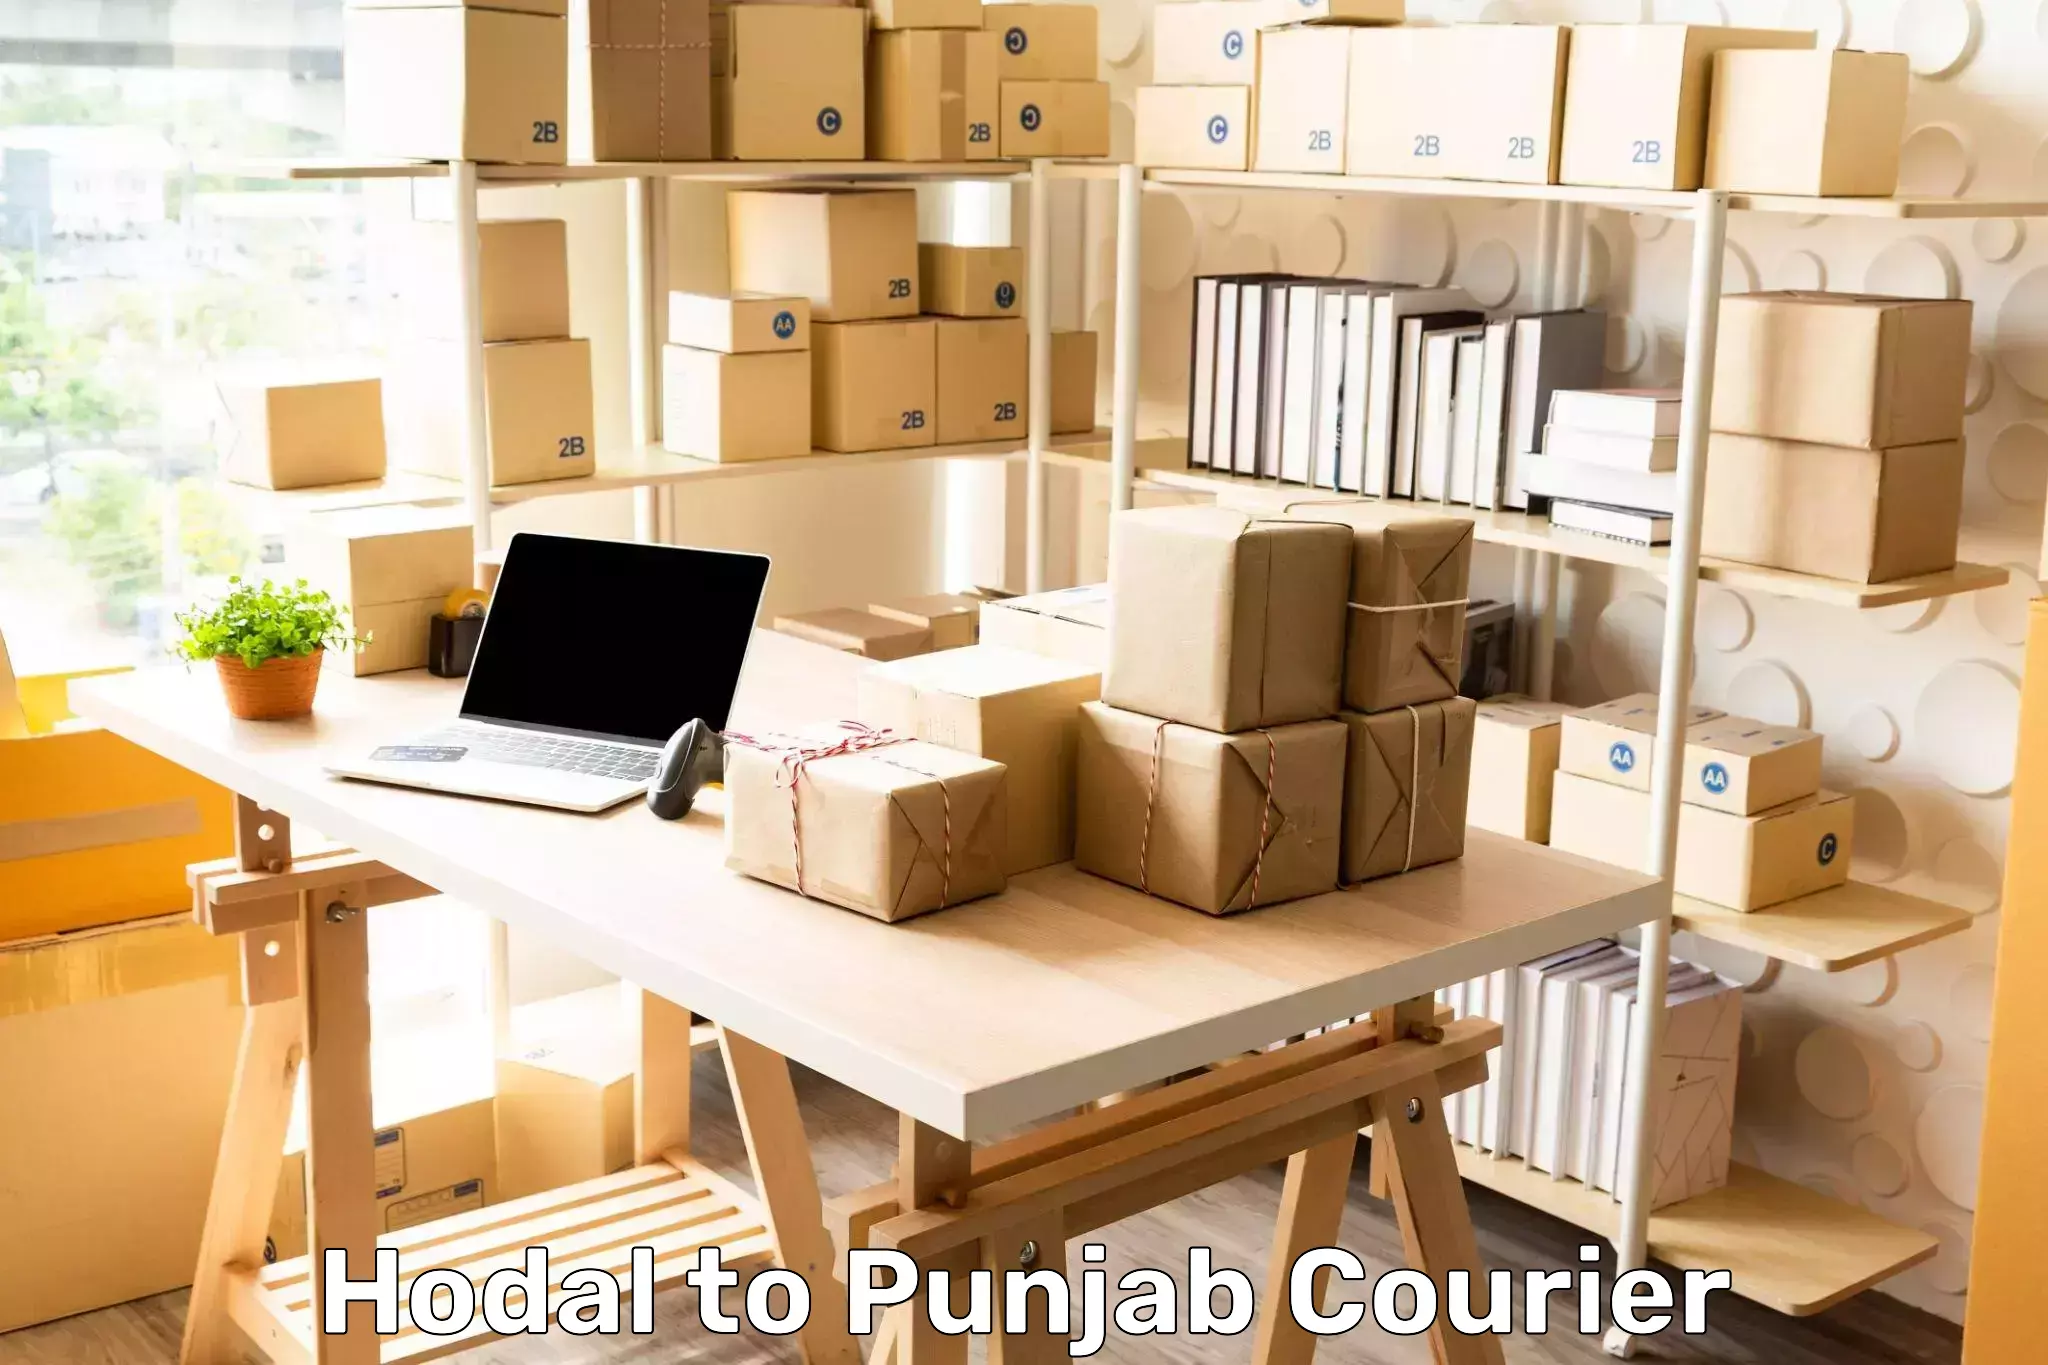 Global freight services Hodal to Punjab